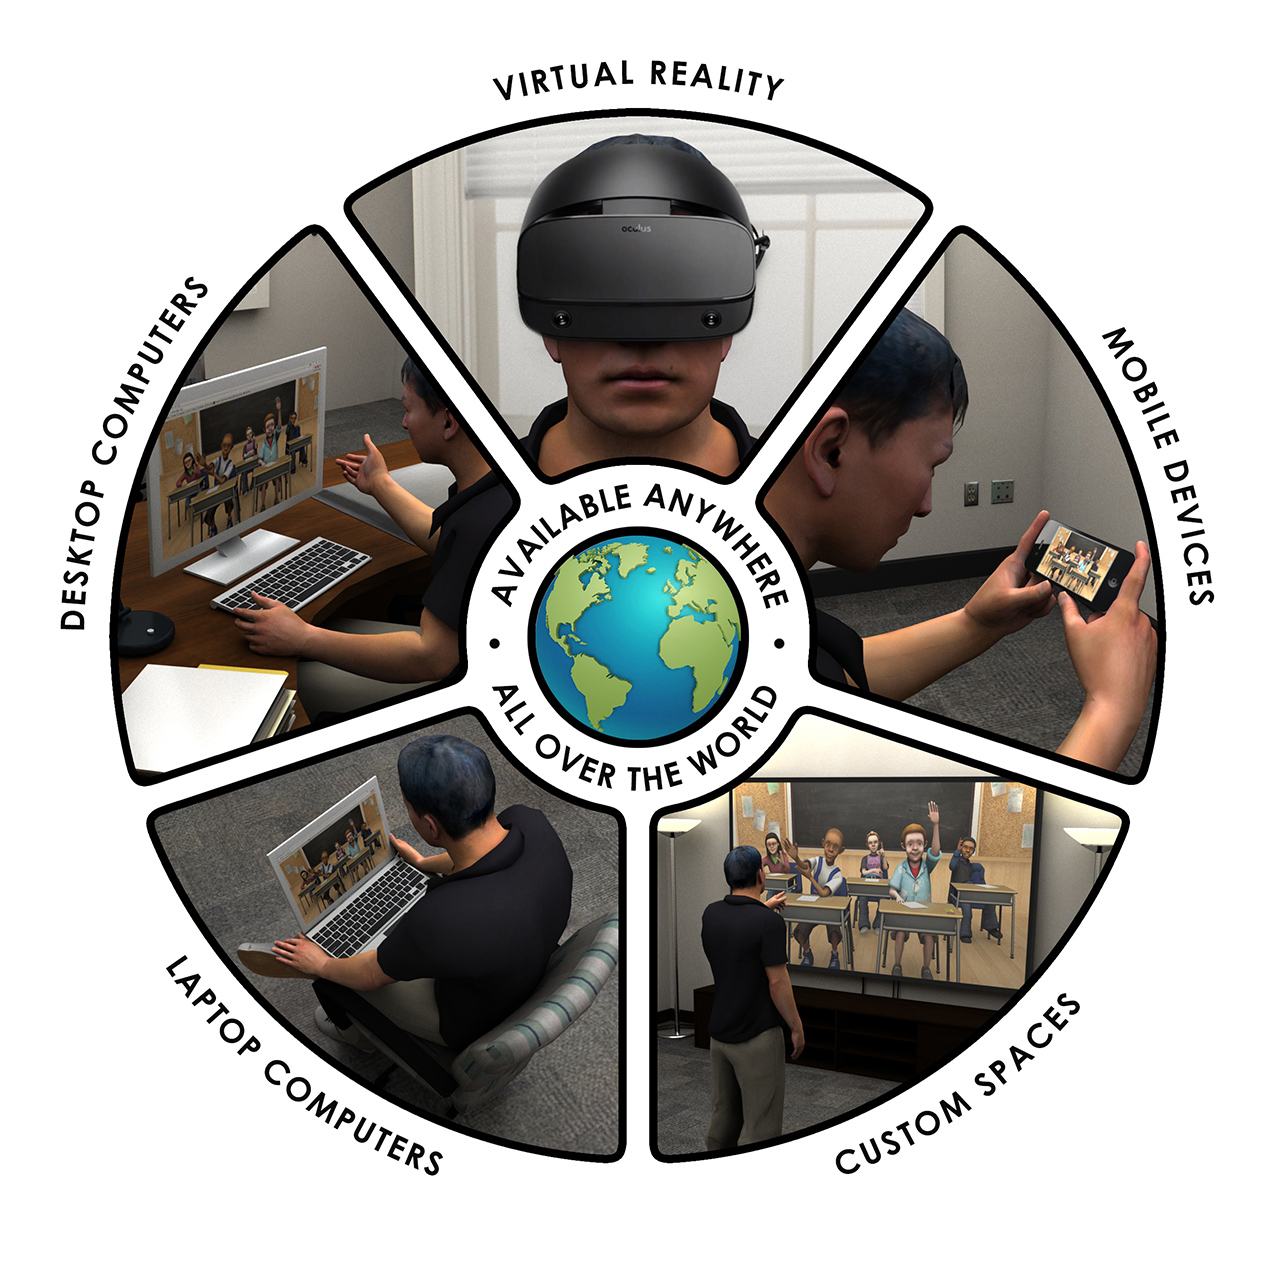 available anywhere all over the world: virtual reality, mobile devices, custom spaces, laptop computers, desktop computers